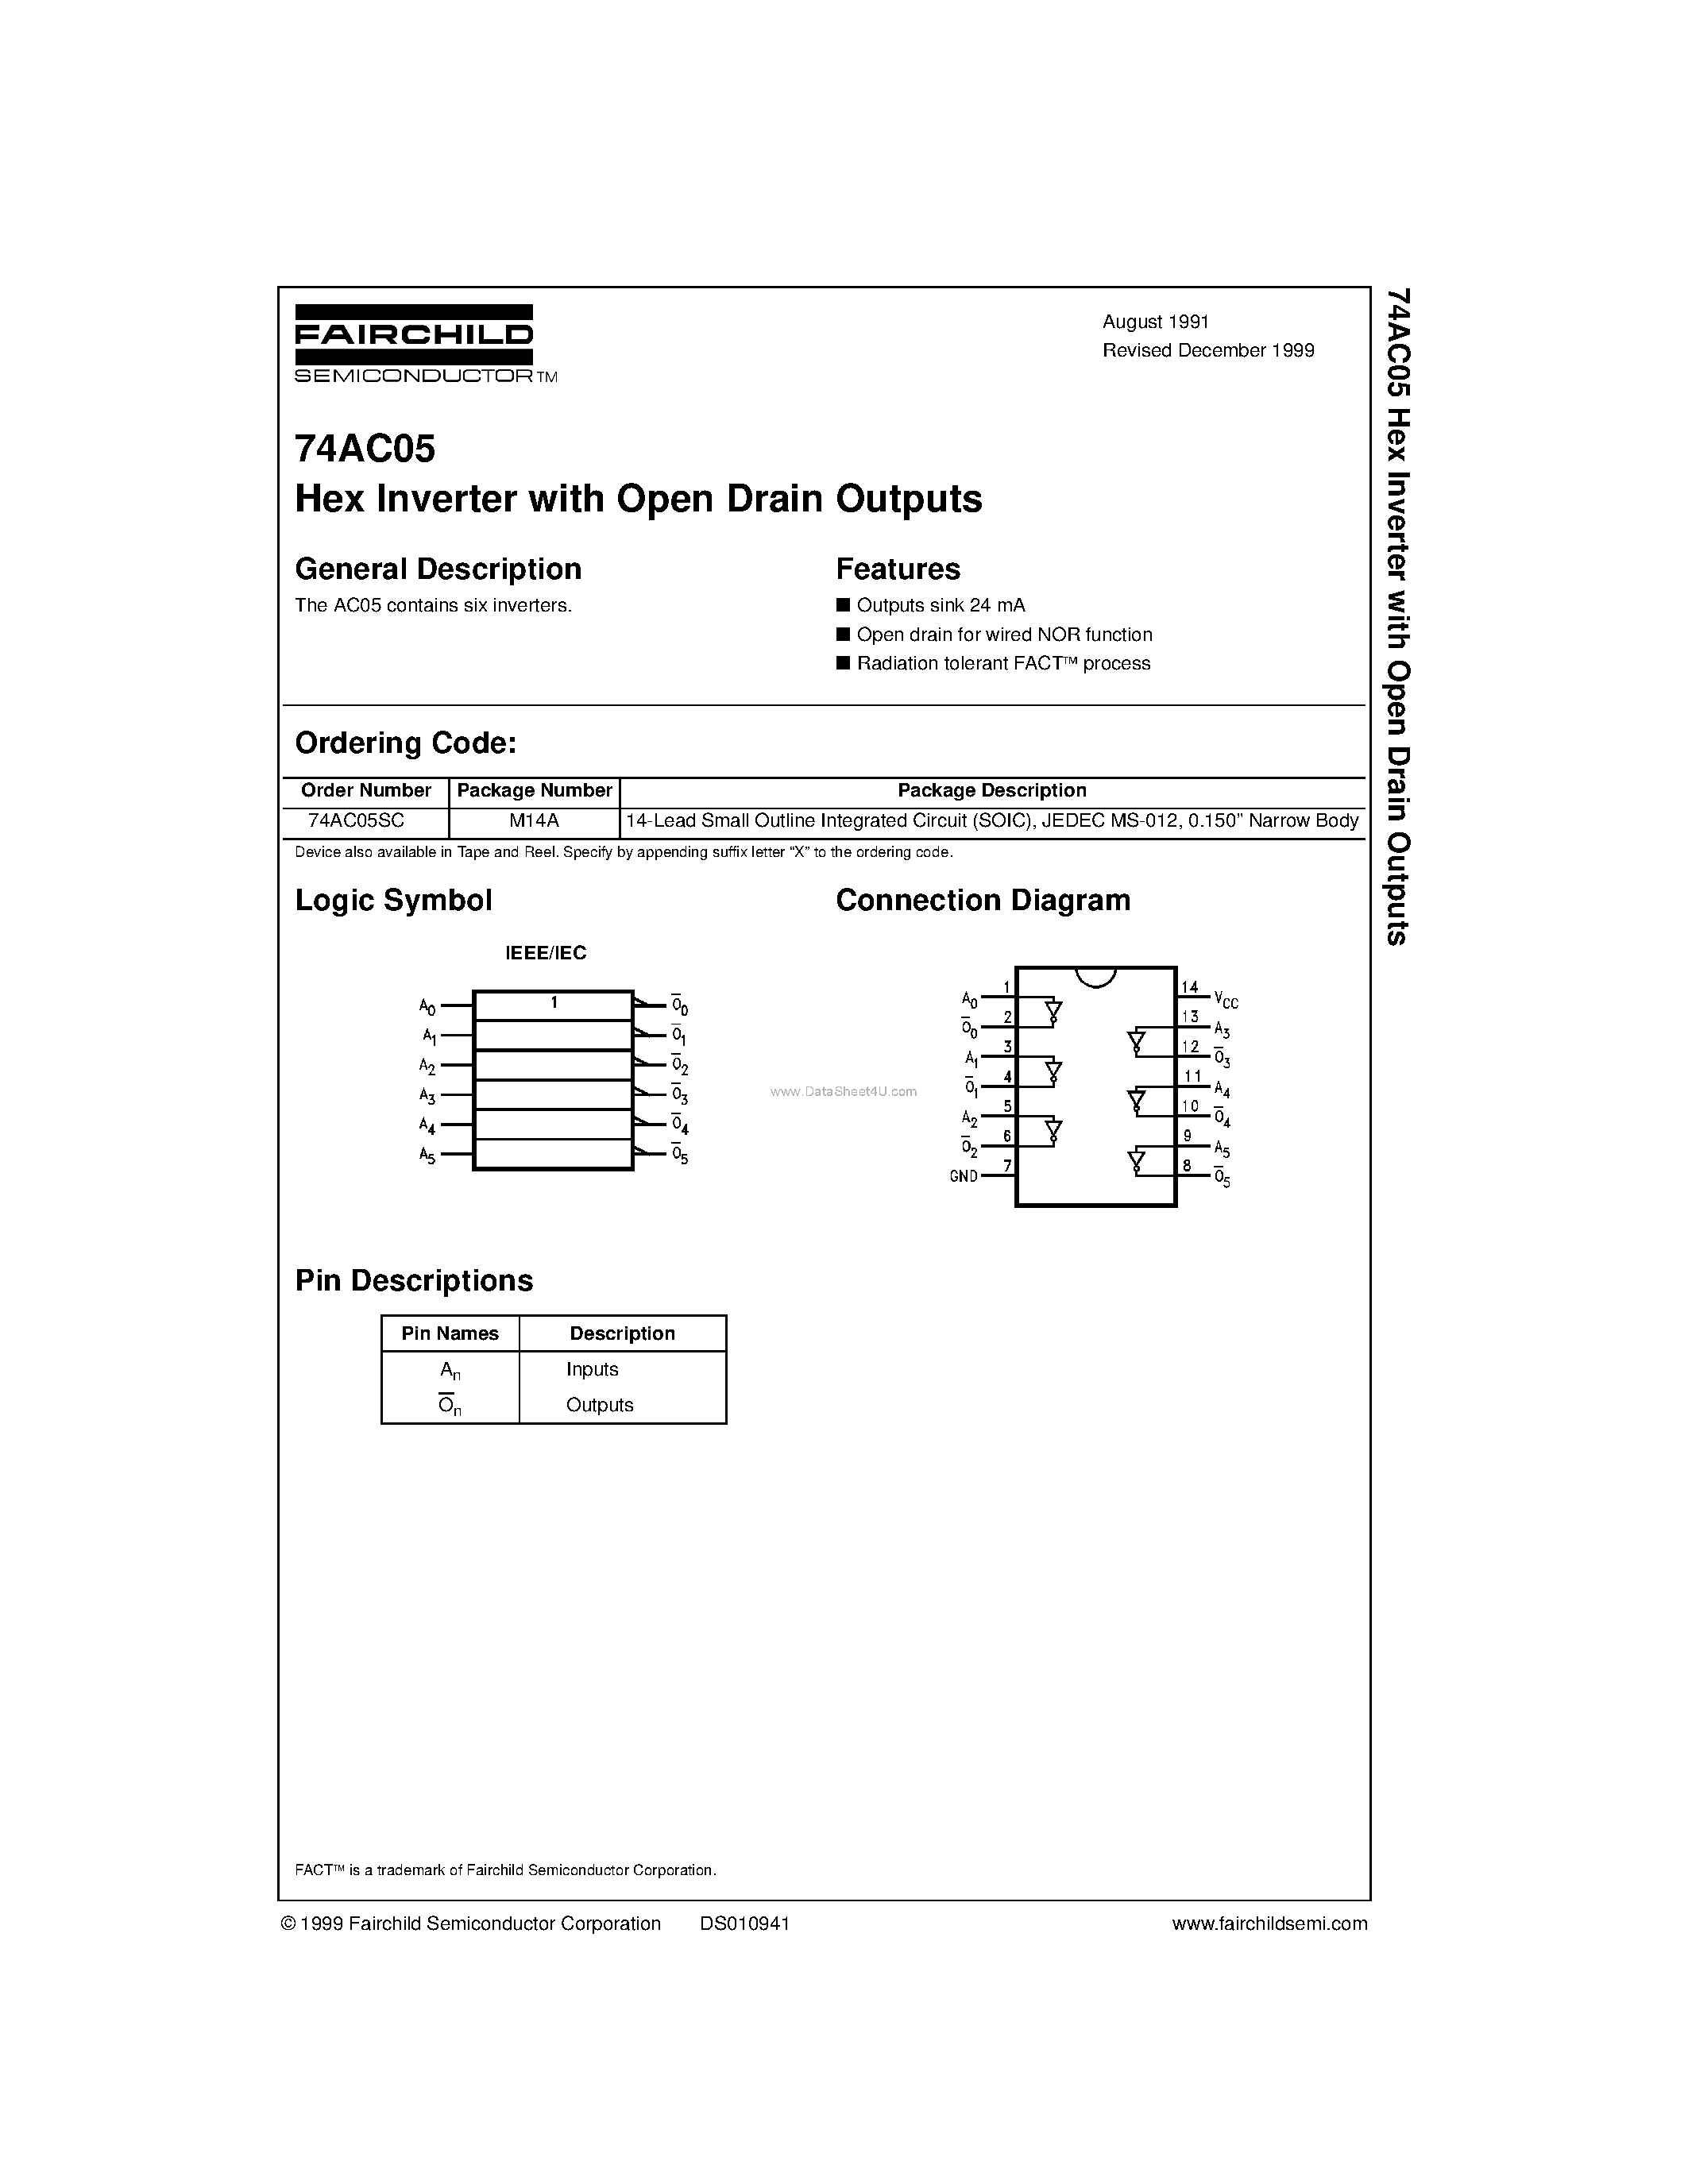 Datasheet 74AC05 - Hex Inverter with Open Drain Outputs page 1